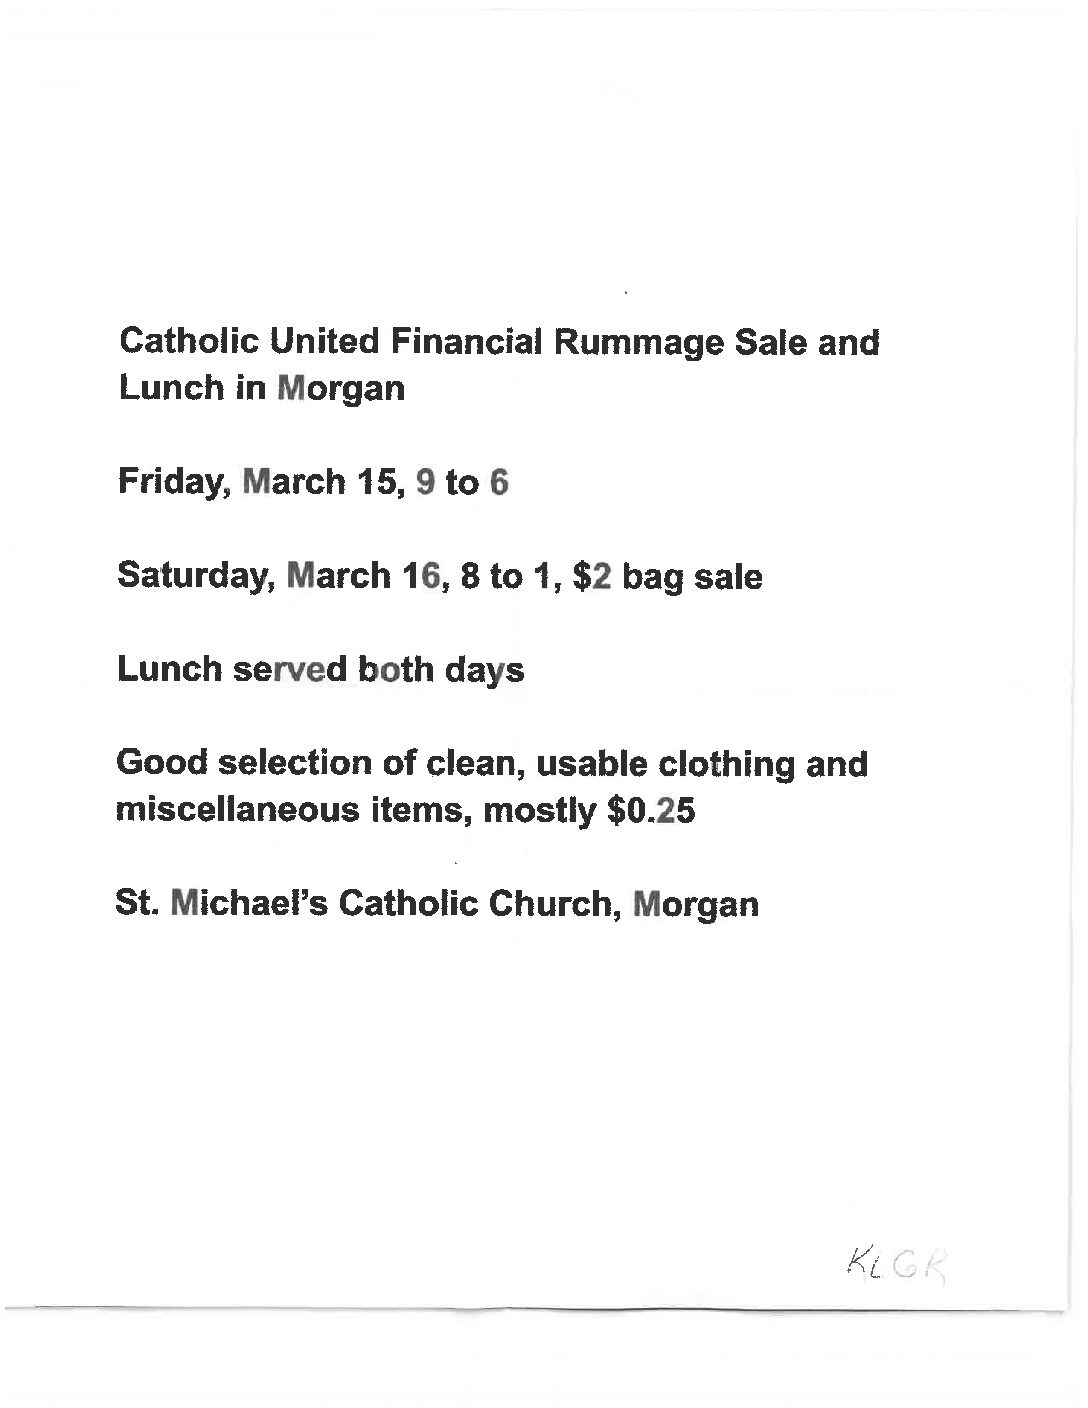 <h1 class="tribe-events-single-event-title">Catholic United Financial Rummage Sale and Lunch</h1>